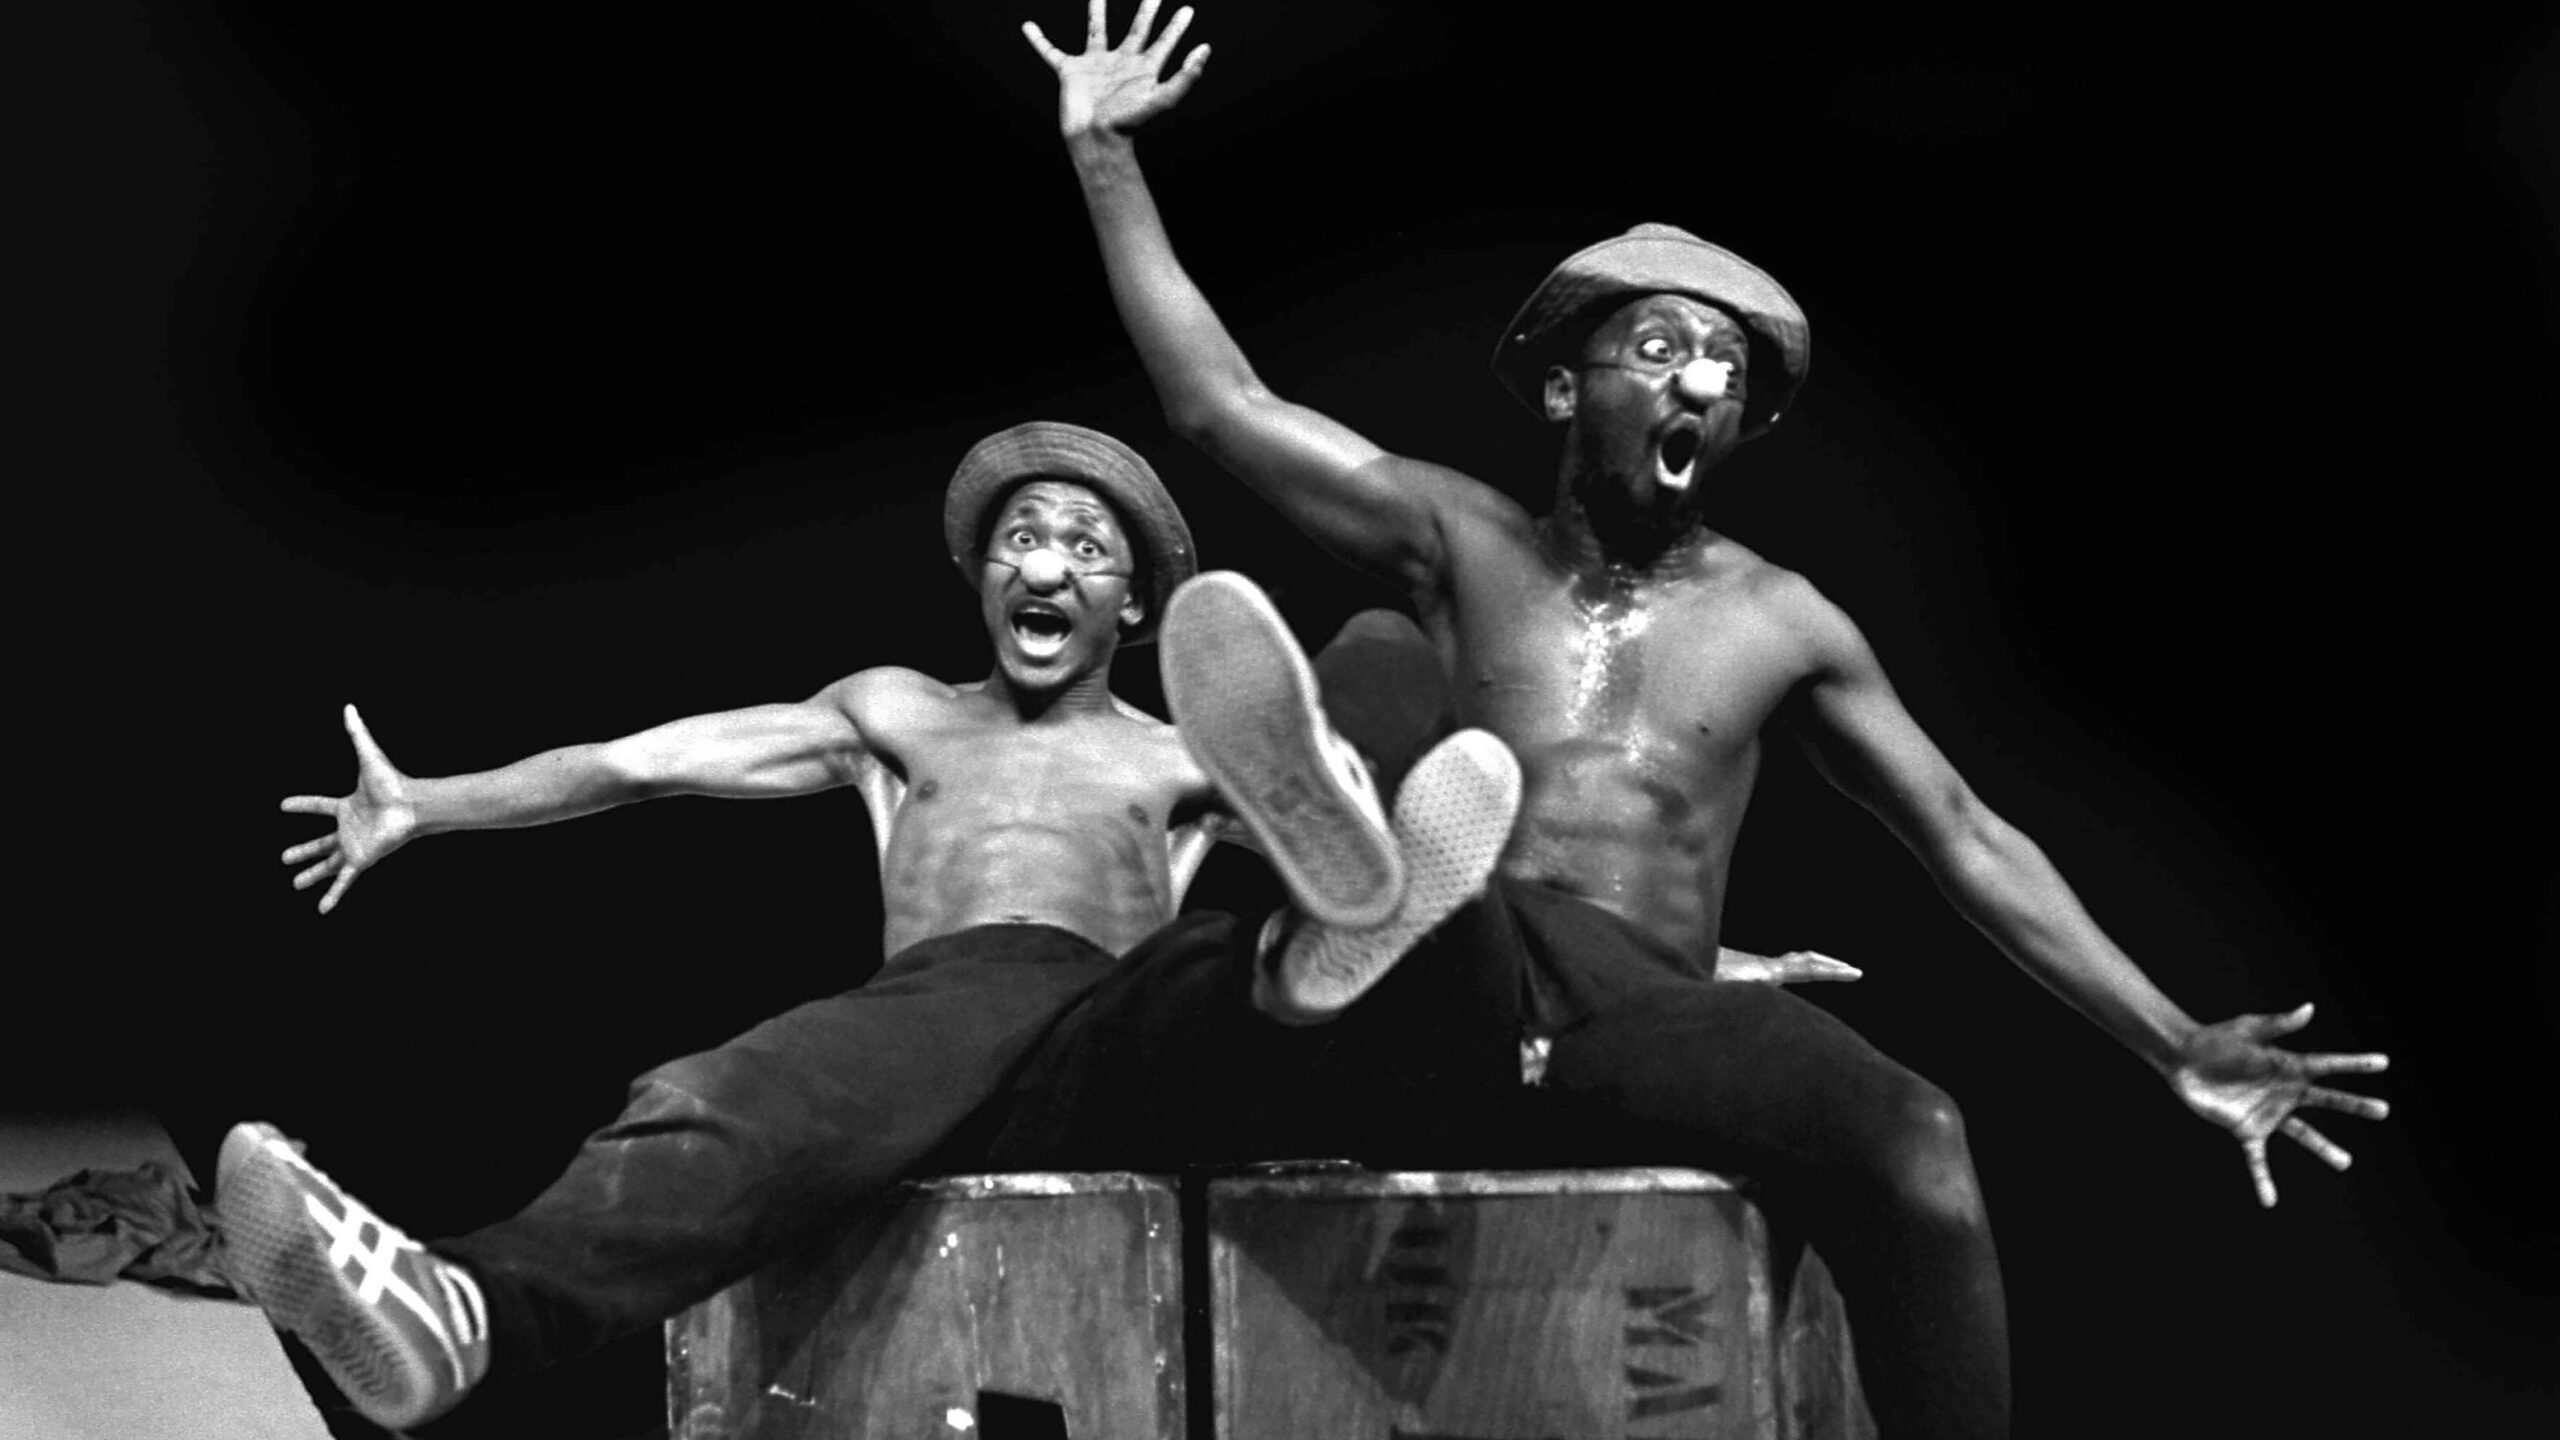 Mbongeni Ngema, South African playwright and creator of ‘Sarafina!,’ has died at 68